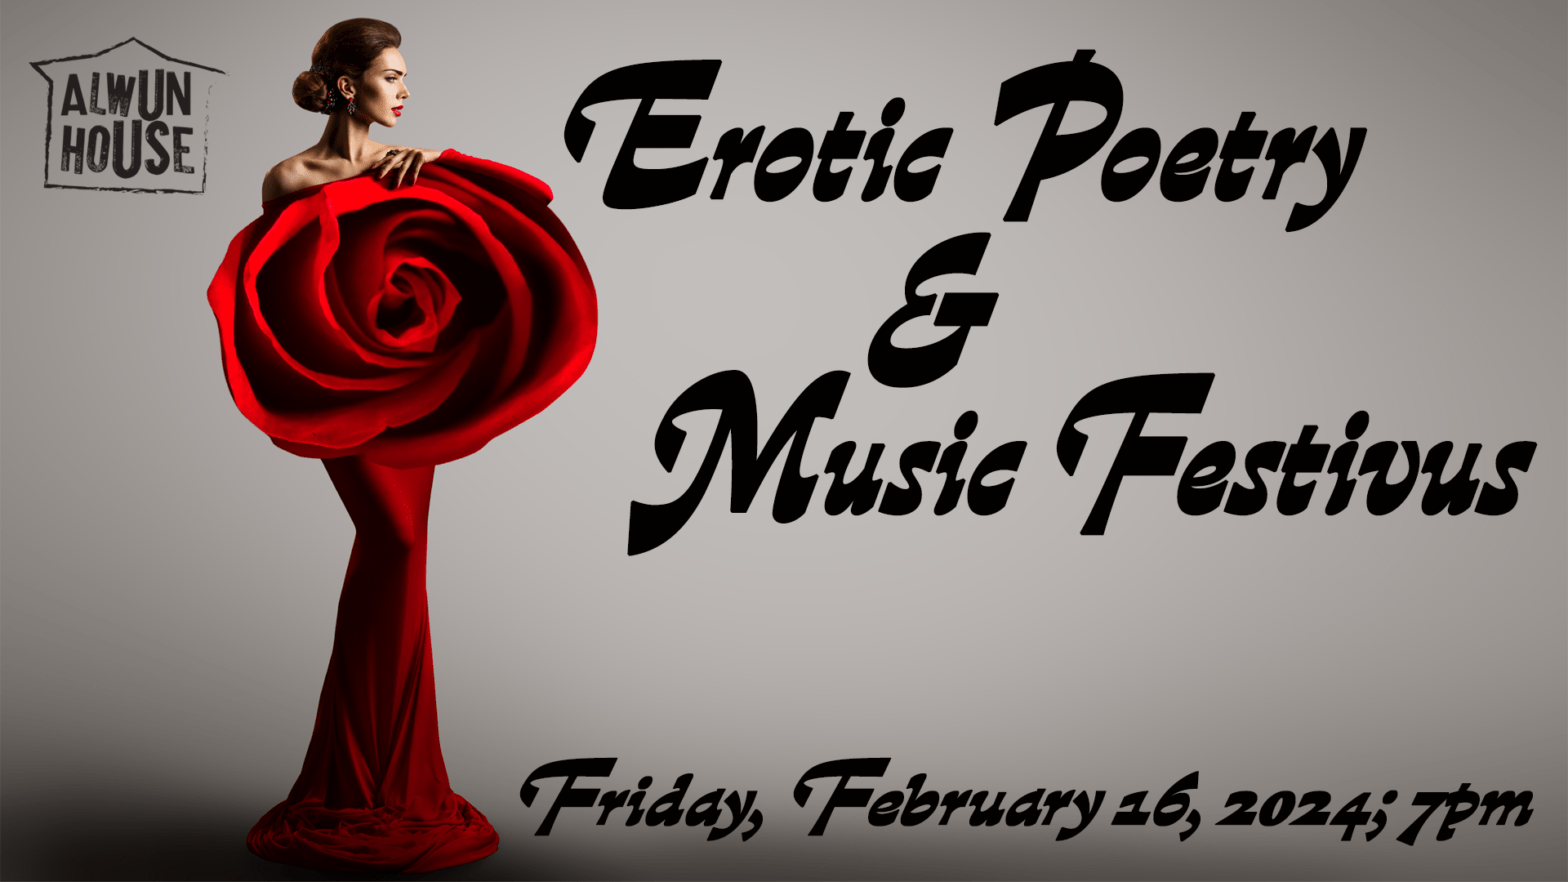 Featured image for post: Erotic Poetry & Music Festivus